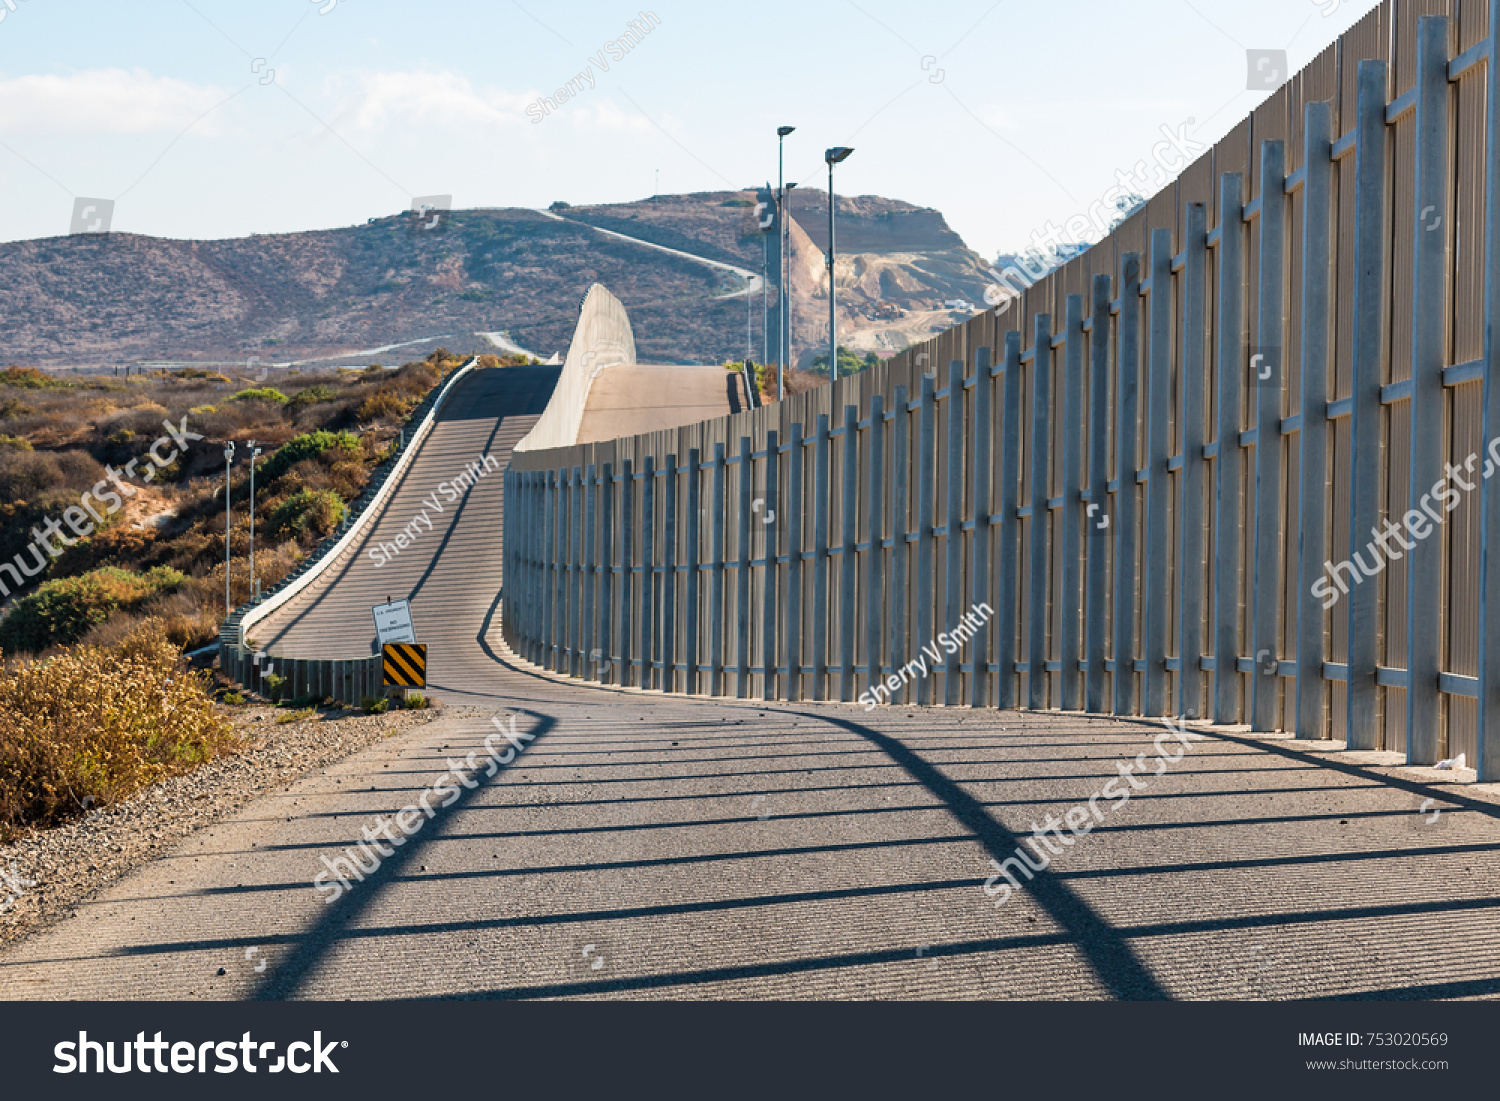 The international border wall between San Diego, California and Tijuana, Mexico, as it begins its journey from the Pacific coast and travels over nearby hills.   #753020569